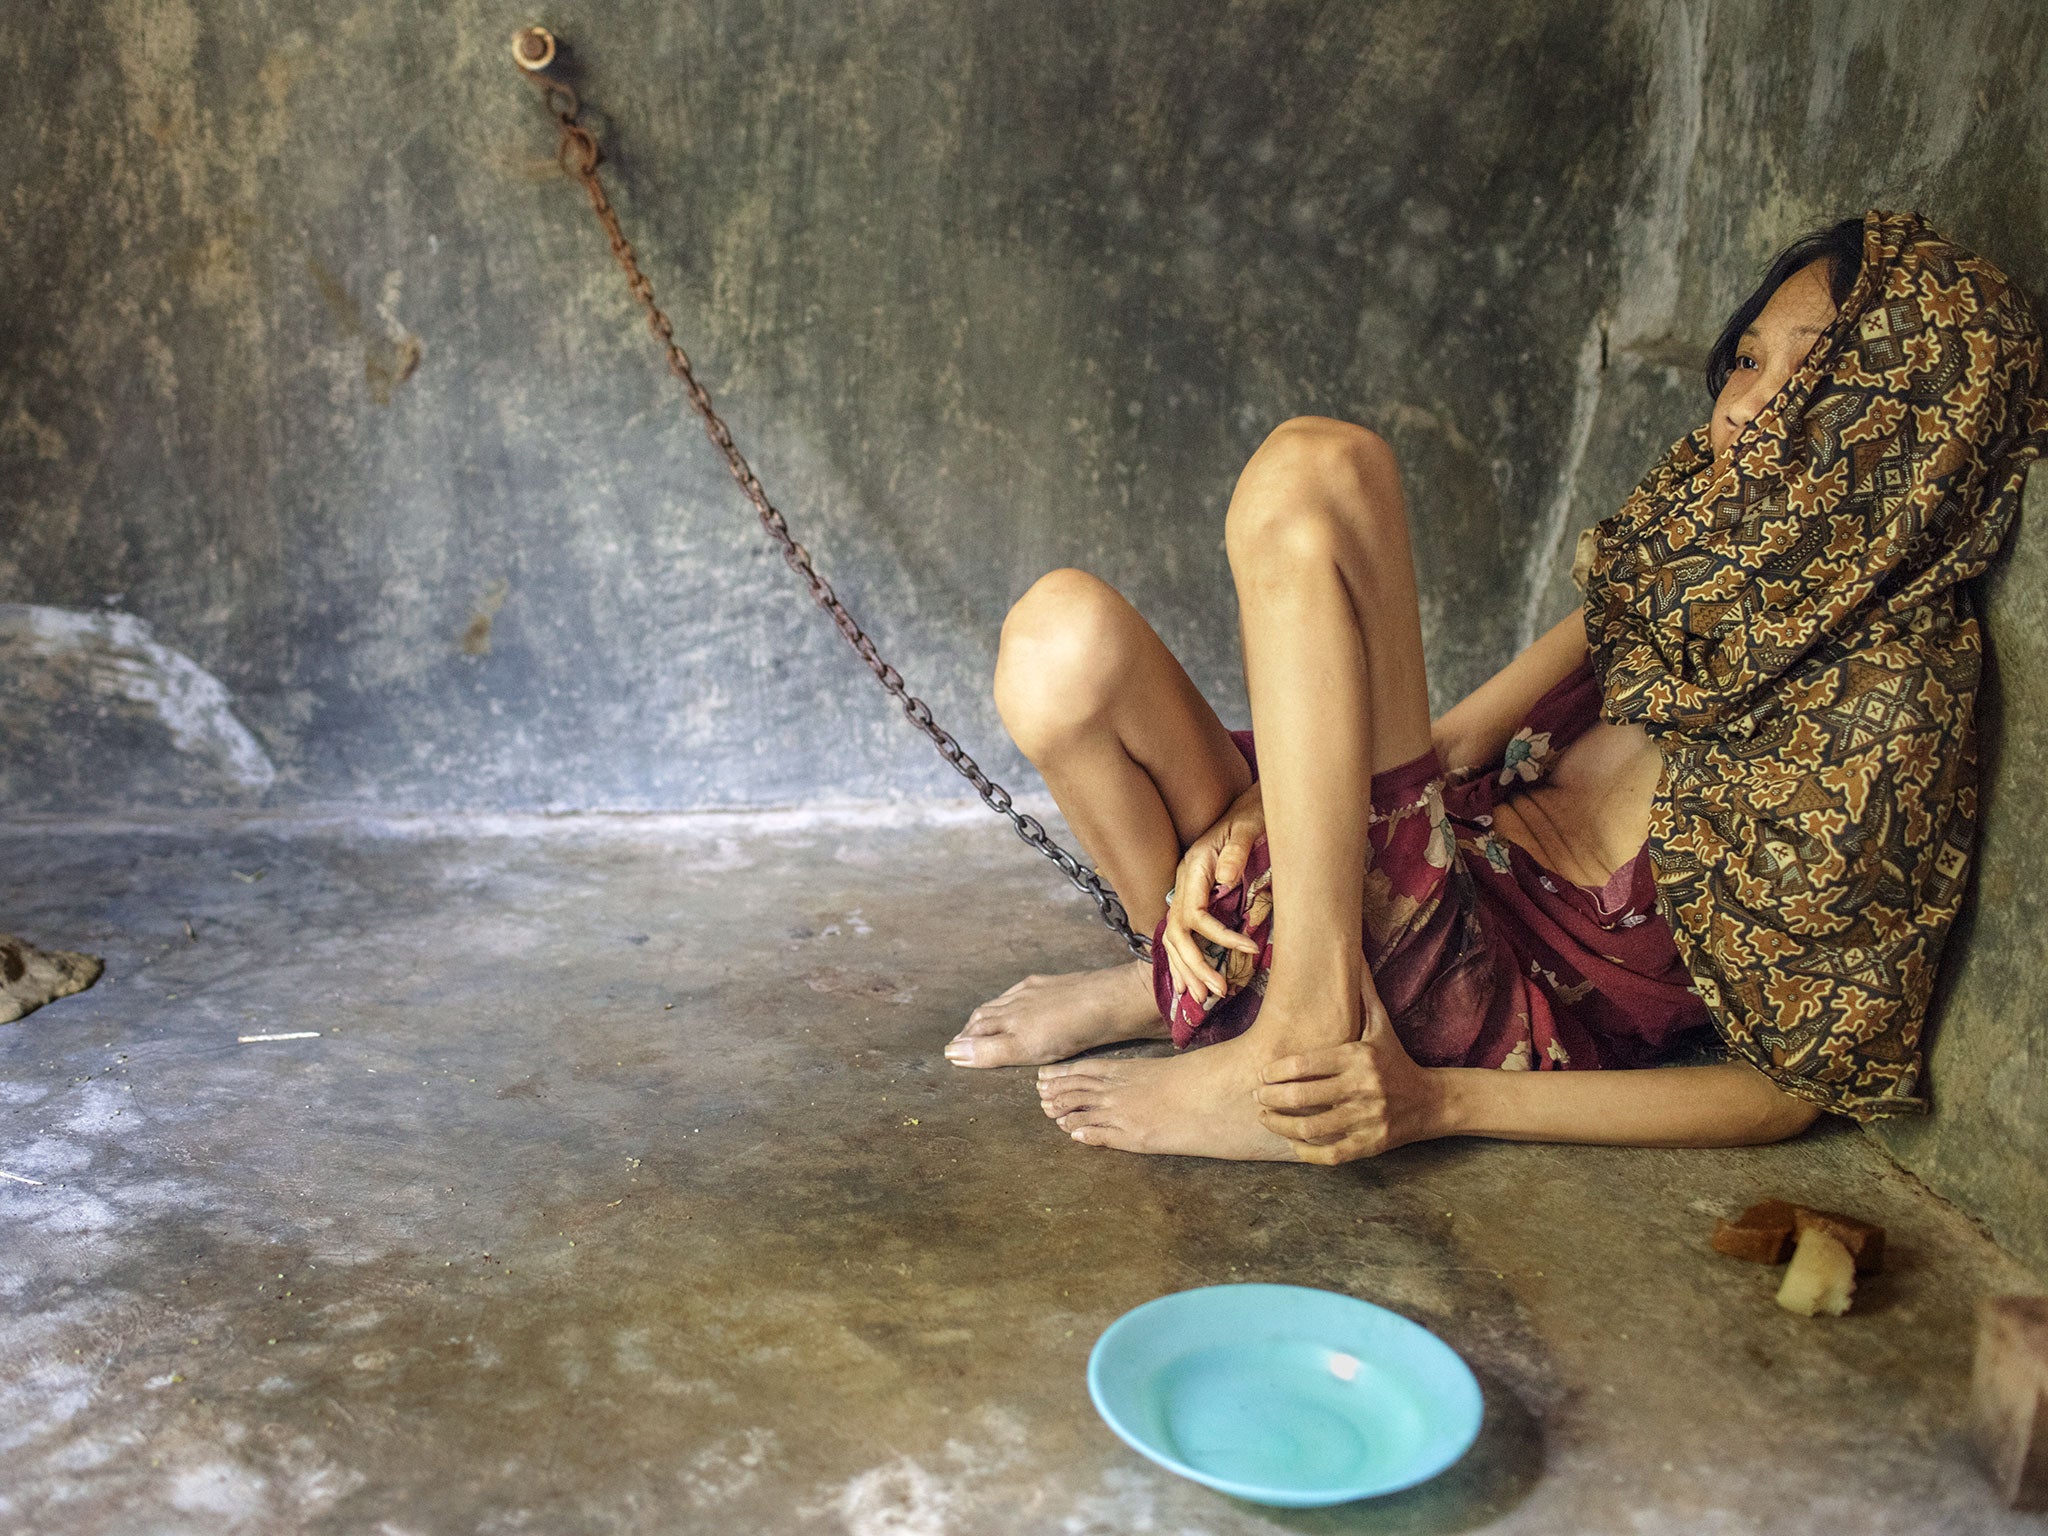 A woman left chained in a room in East Java